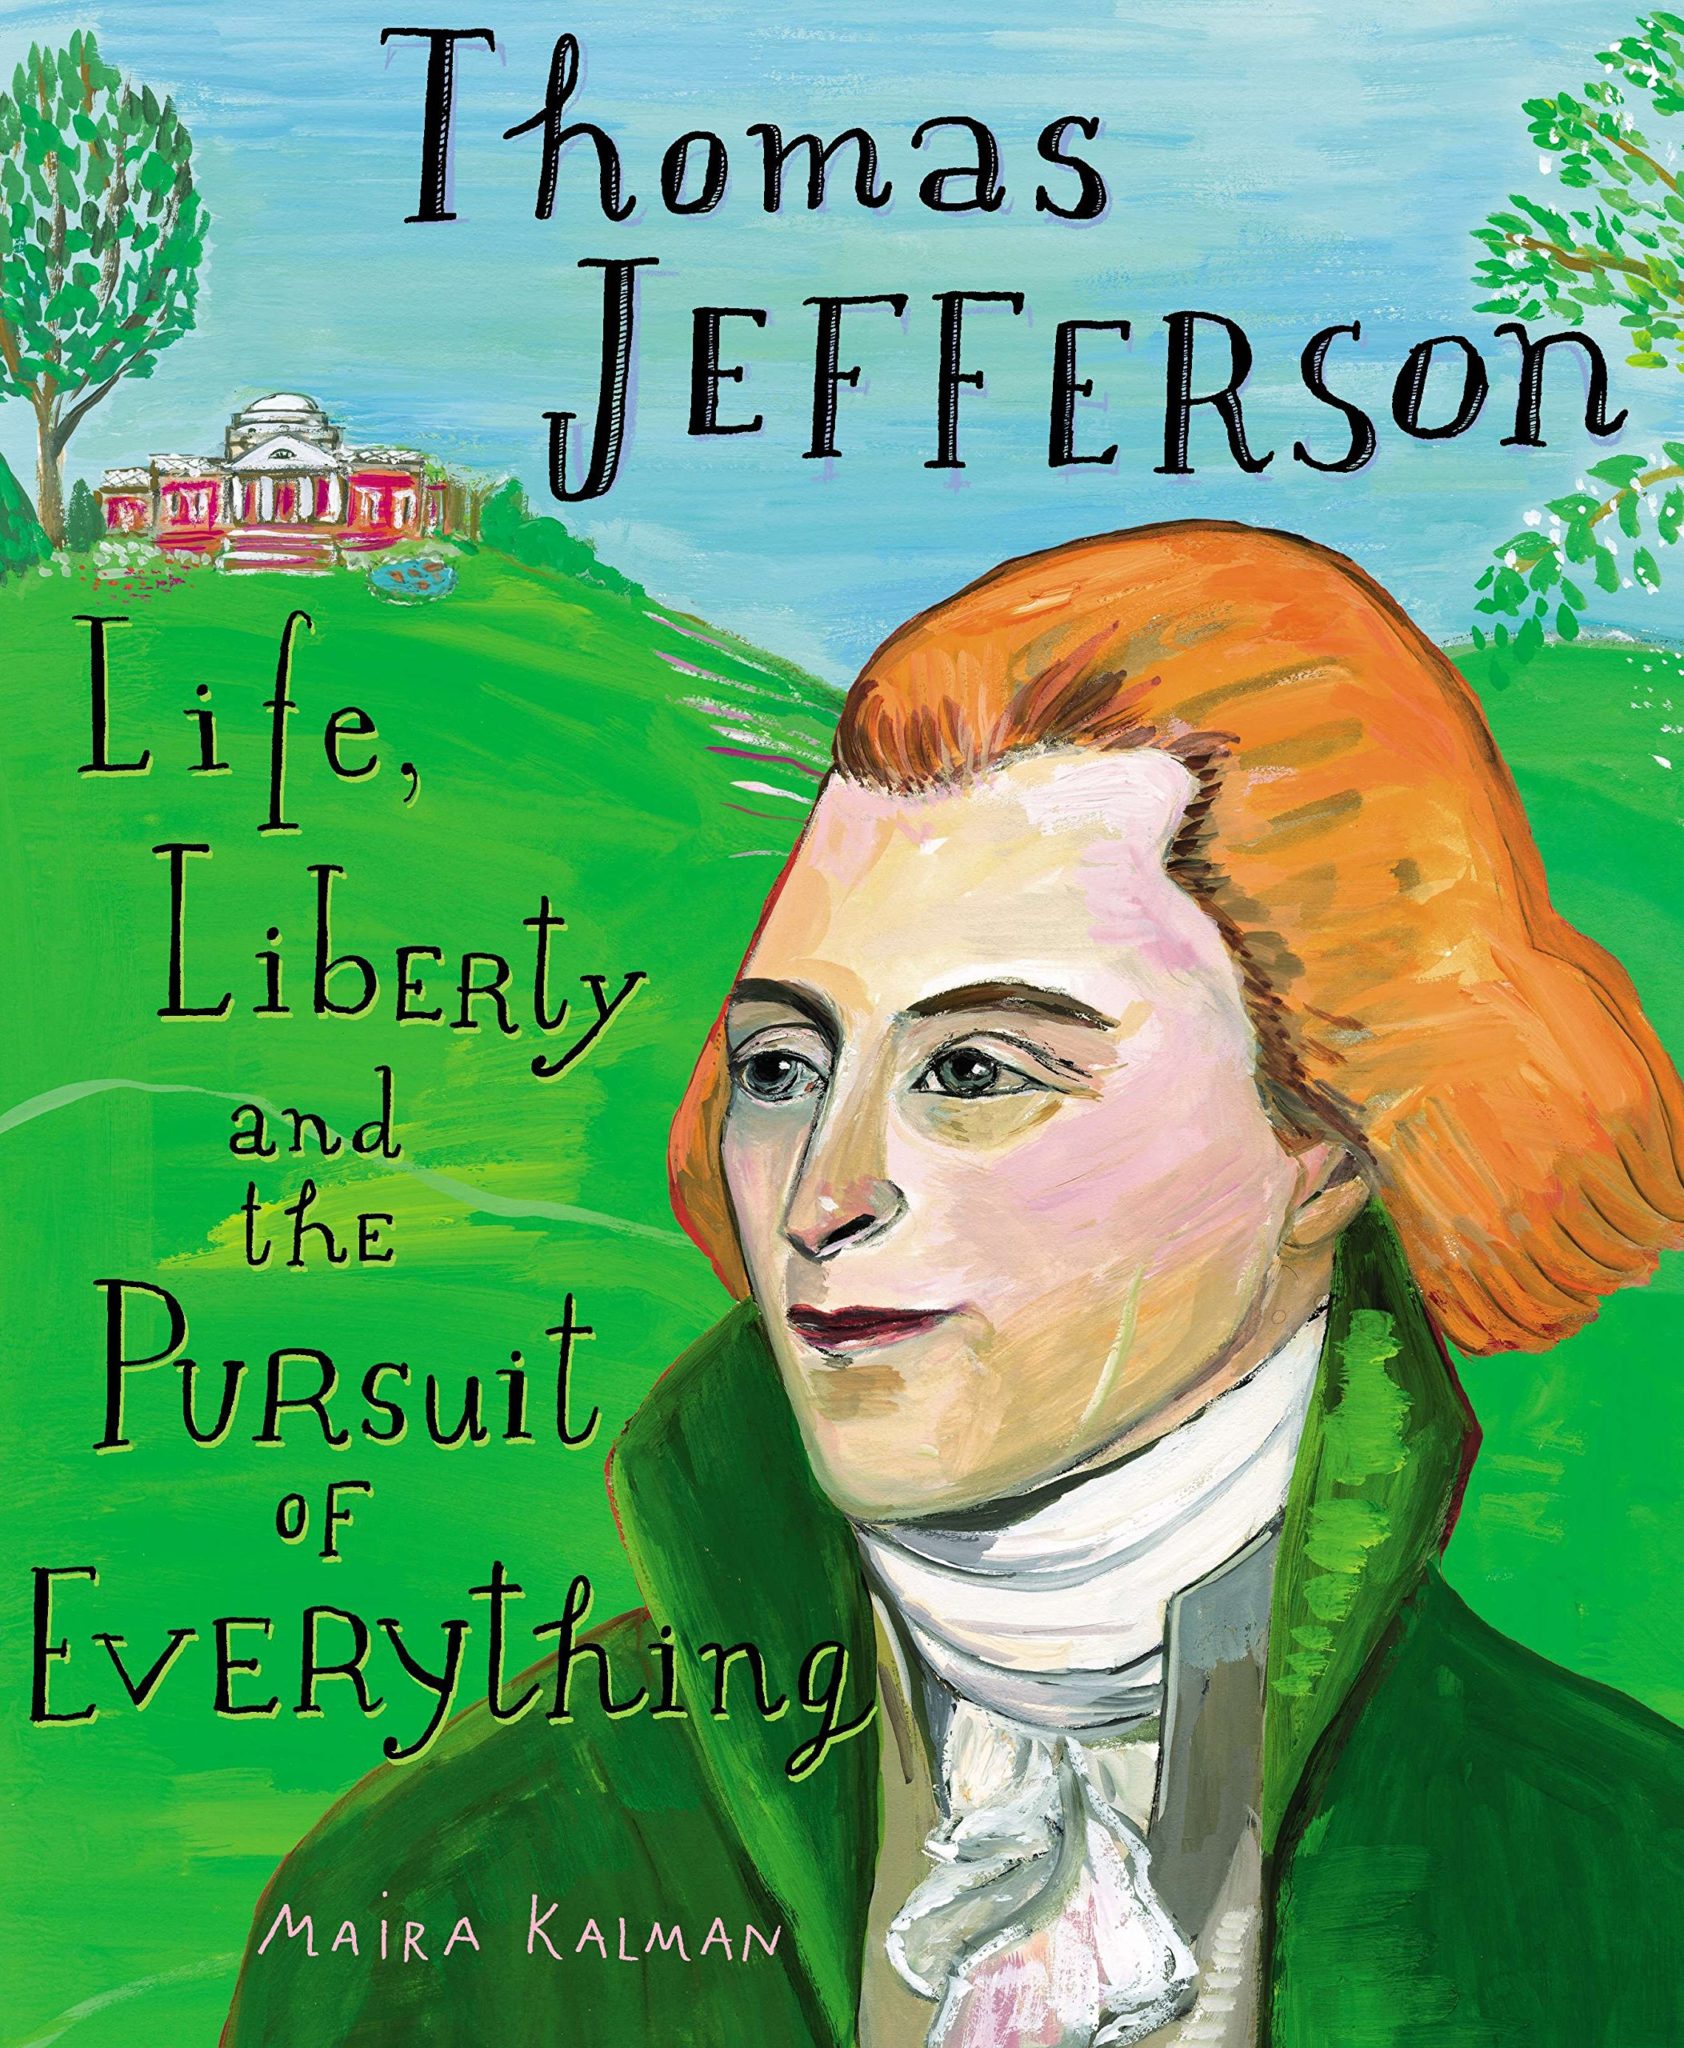 "Thomas Jefferson: Life, Liberty and the Pursuit of Everything" book cover